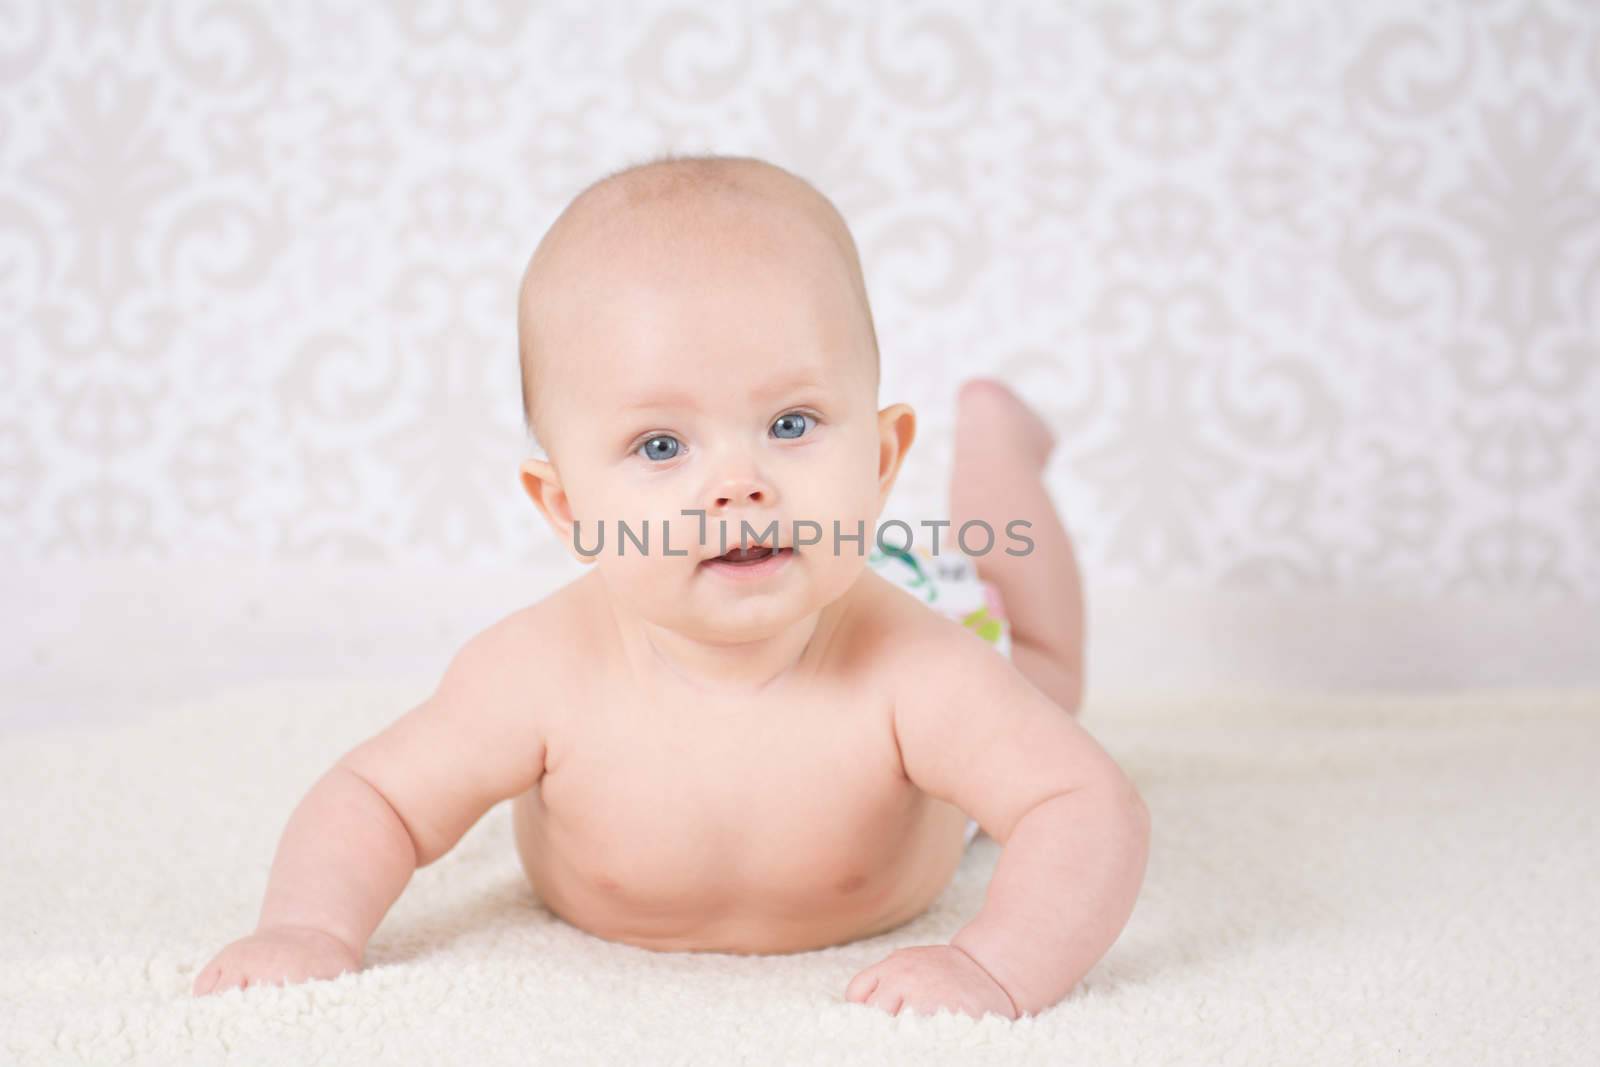 Baby in a reusable nappy, lying on a belly on a light background